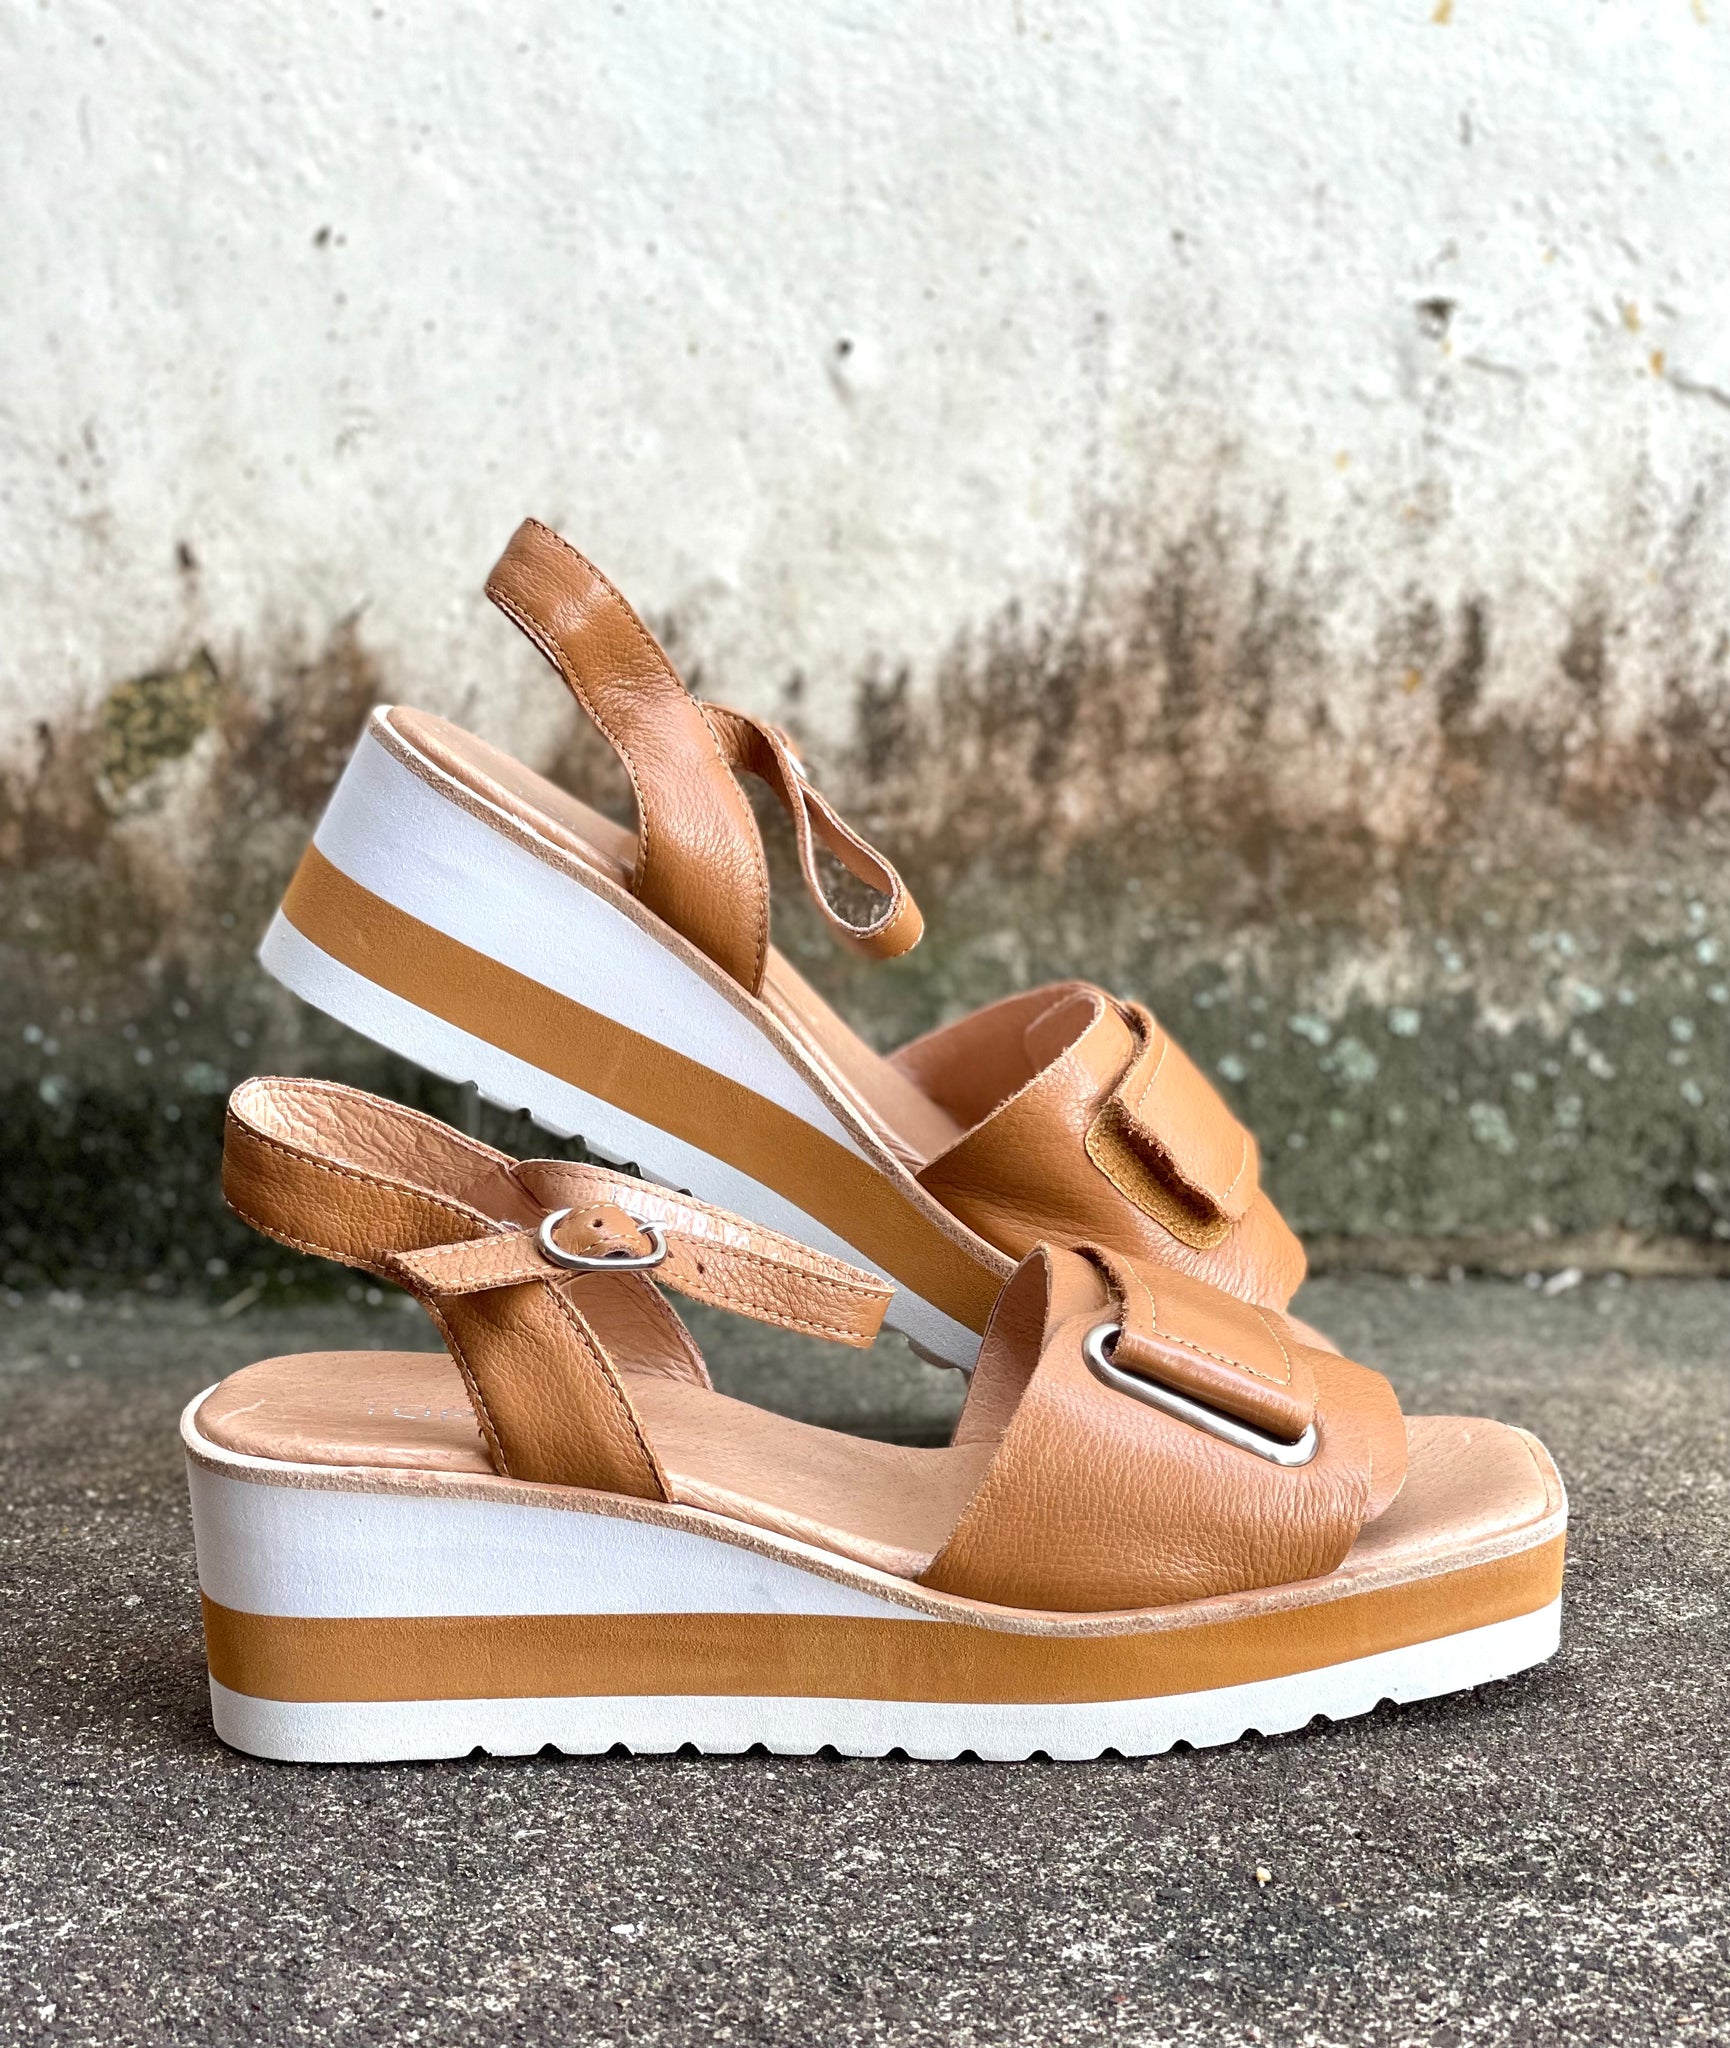 Top End Hancer-To Tan Leather Wedge